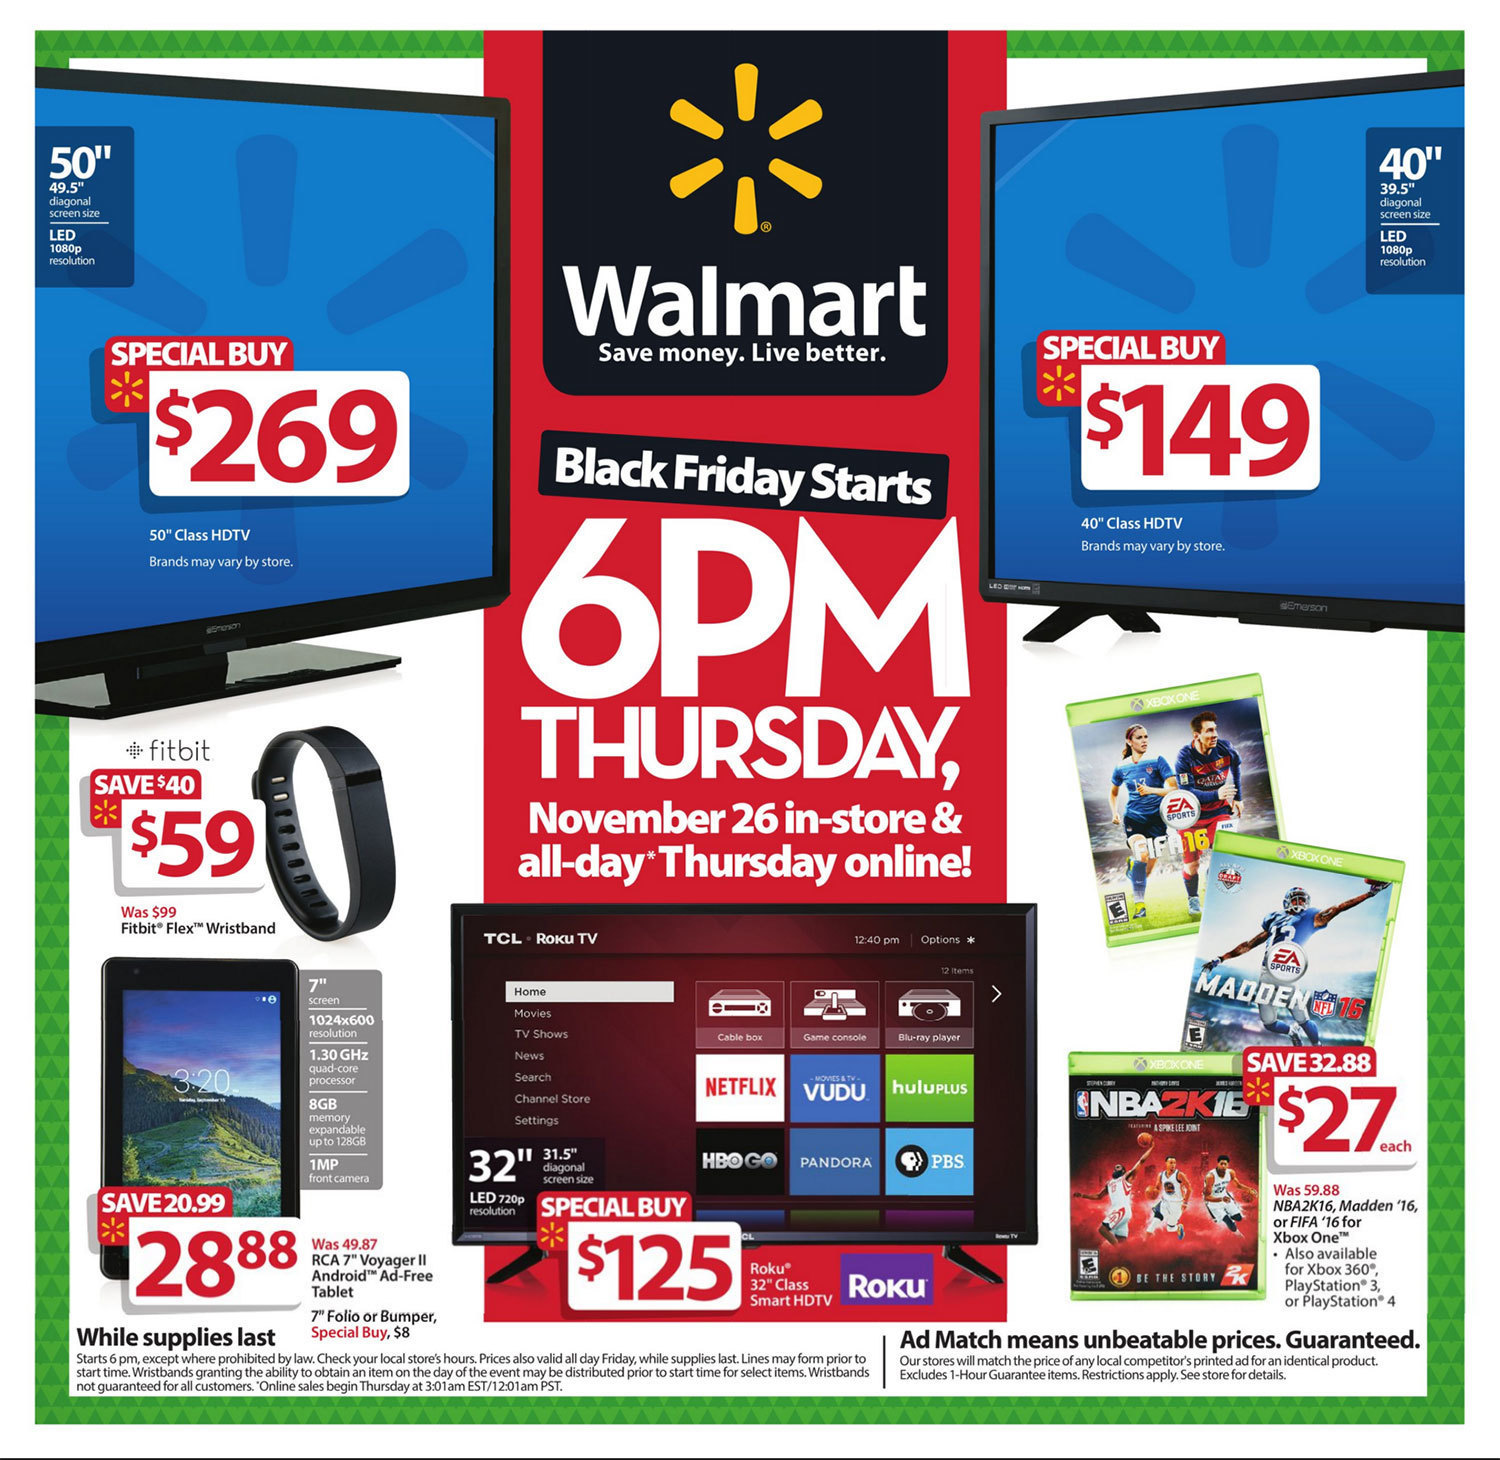 Walmart Black Friday sales circular released - here's all 32 pages - What On Sale In Walmart On Black Friday